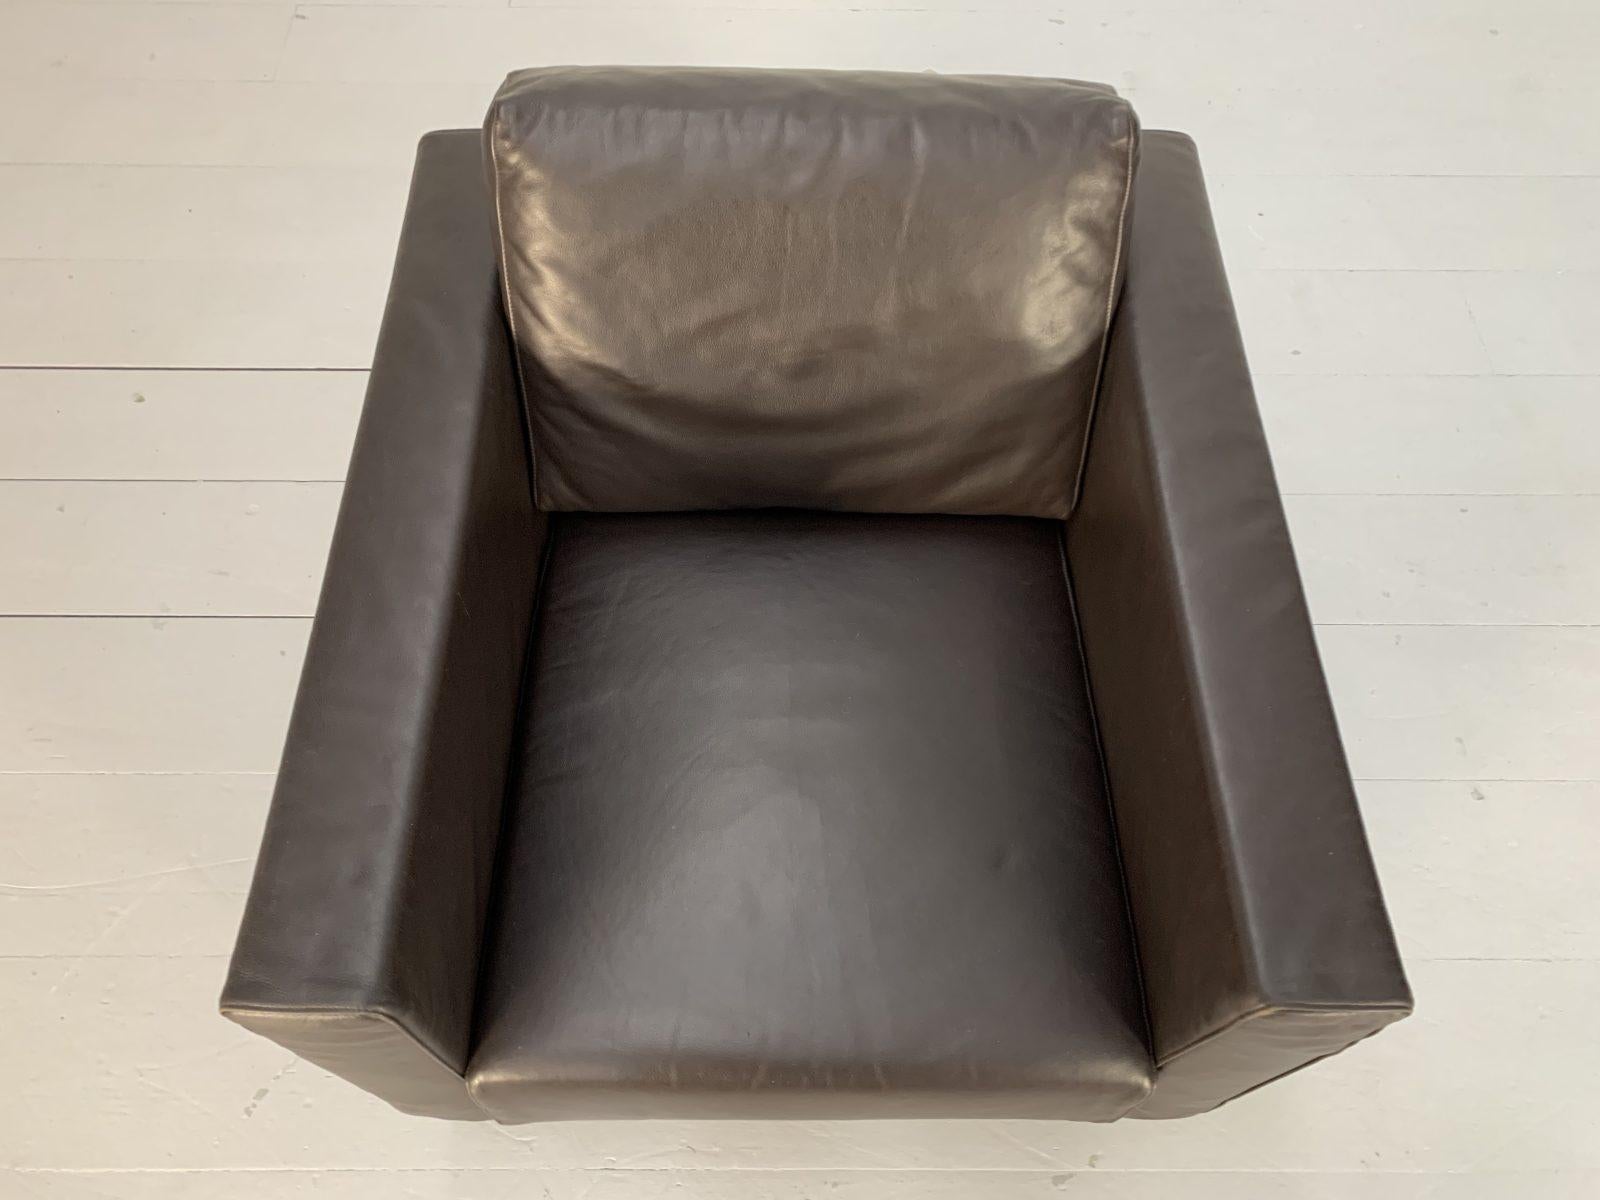 Vitra “Park” 2 Sofa & Armchair Suite, in Dark Brown Leather For Sale 13